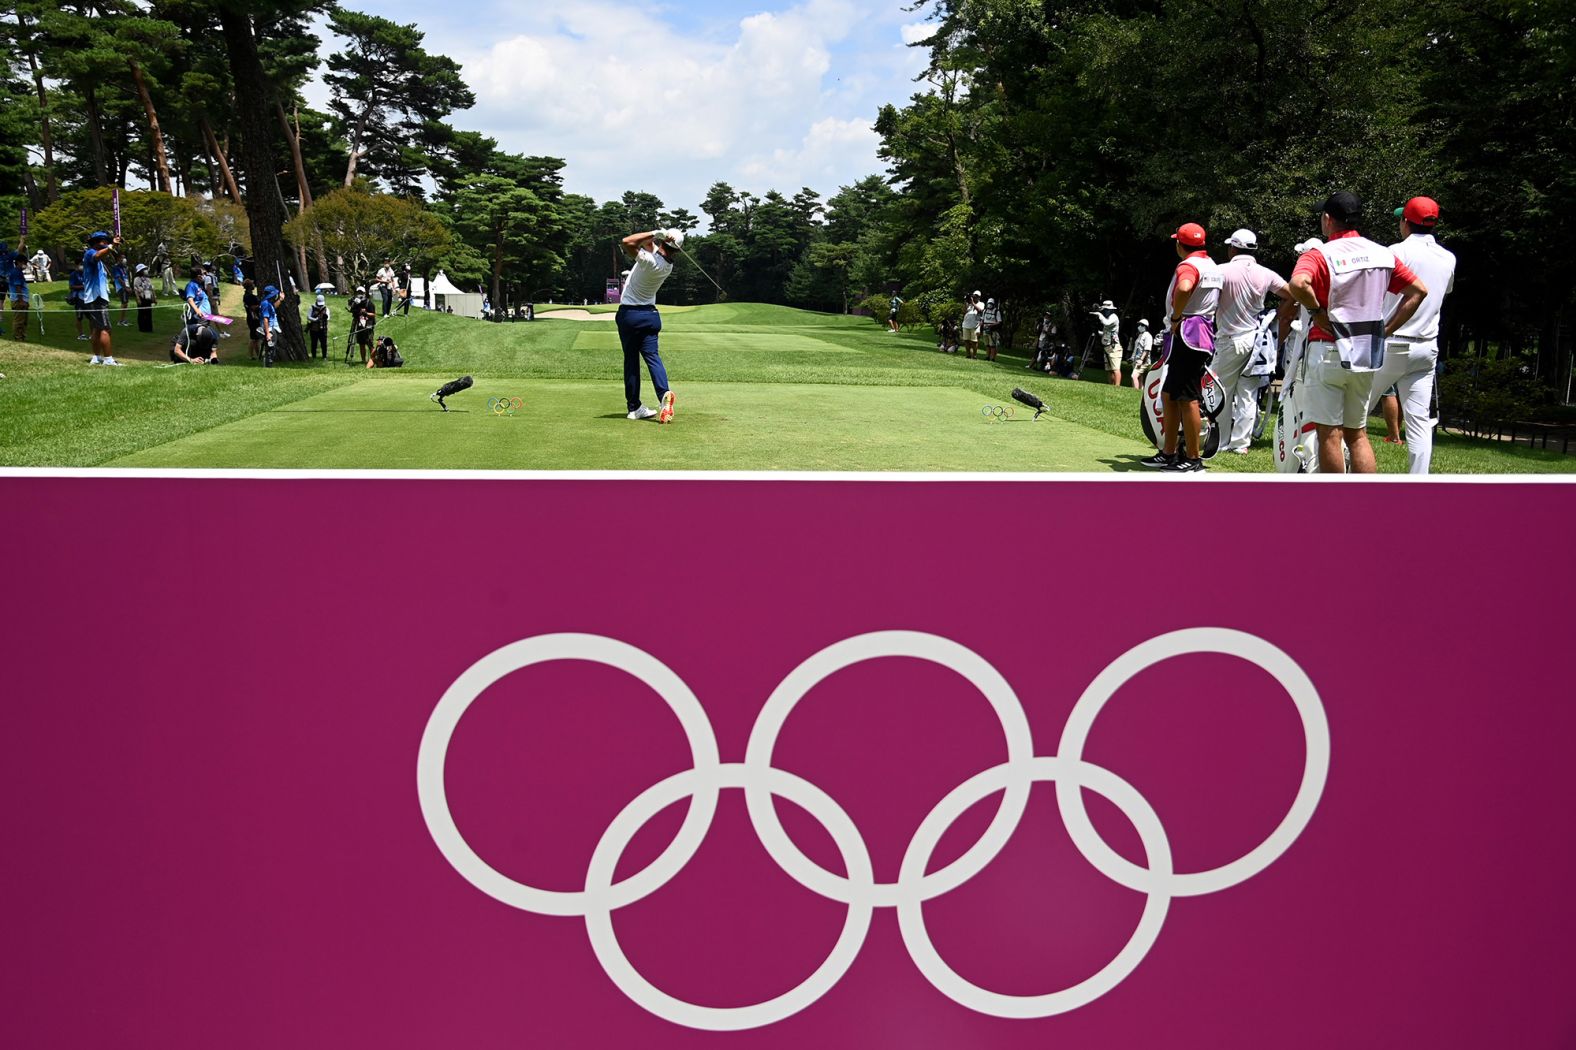 US golfer Xander Schauffele hits a tee shot during the third round on Saturday, July 31. <a href="index.php?page=&url=https%3A%2F%2Fwww.cnn.com%2Fworld%2Flive-news%2Ftokyo-2020-olympics-08-01-21-spt%2Fh_59d1594d965ff40e9283eb85afbefd2c" target="_blank">He went on to win gold,</a> holding off Slovakia's Rory Sabbatini by one stroke.